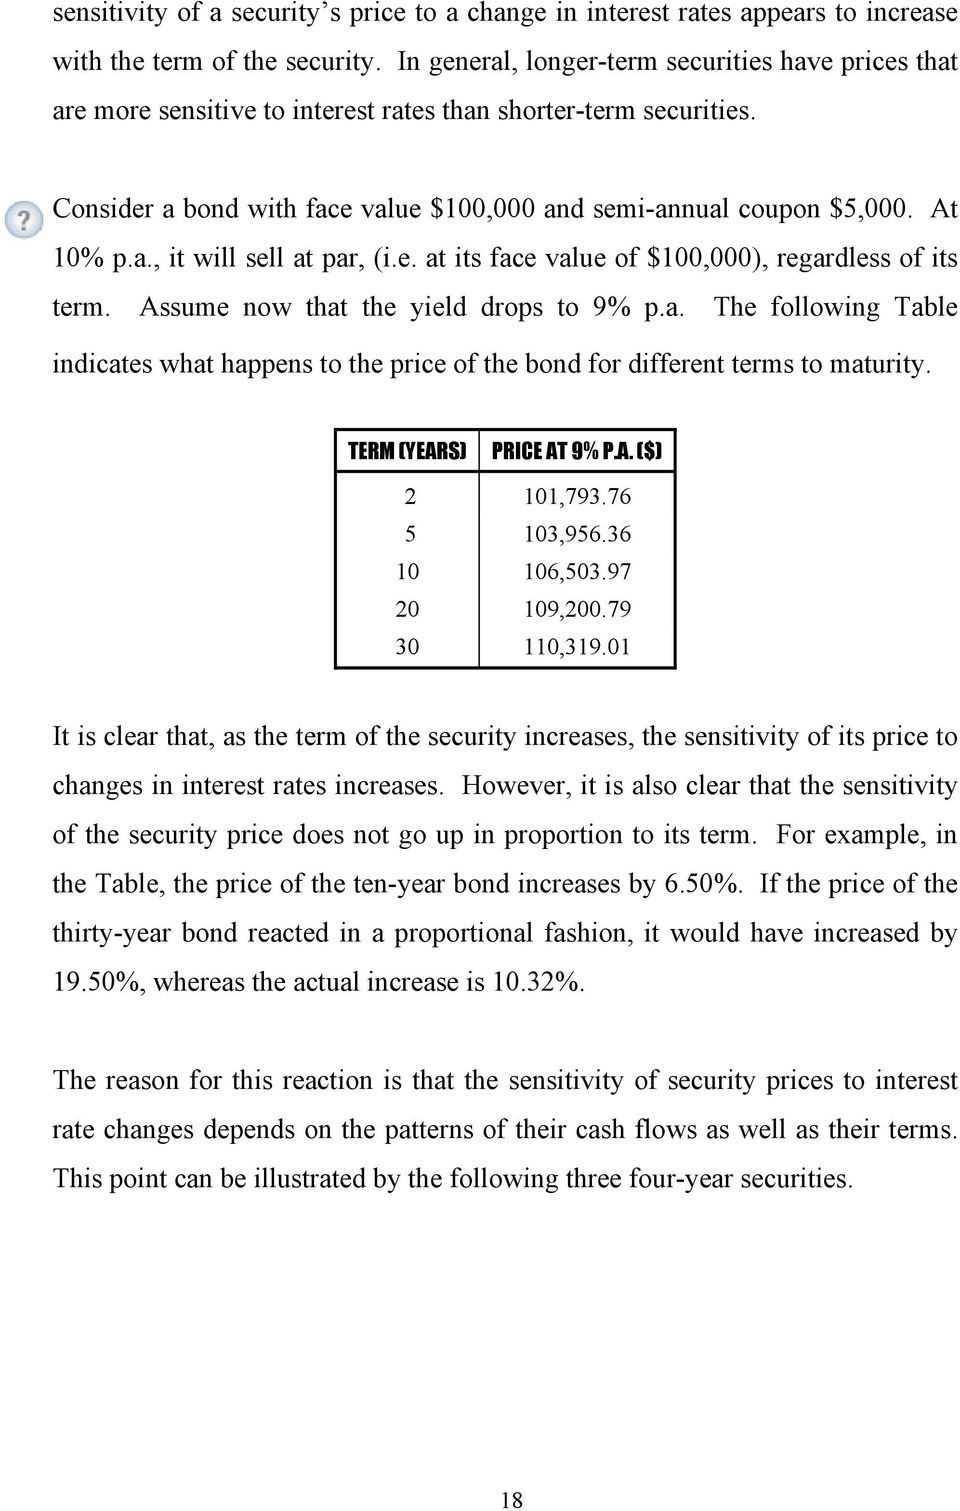 a., it will sell at par, (i.e. at its face value of $100,000), regardless of its term. Assume now that the yield drops to 9% p.a. The following Table indicates what happens to the price of the bond for different terms to maturity.